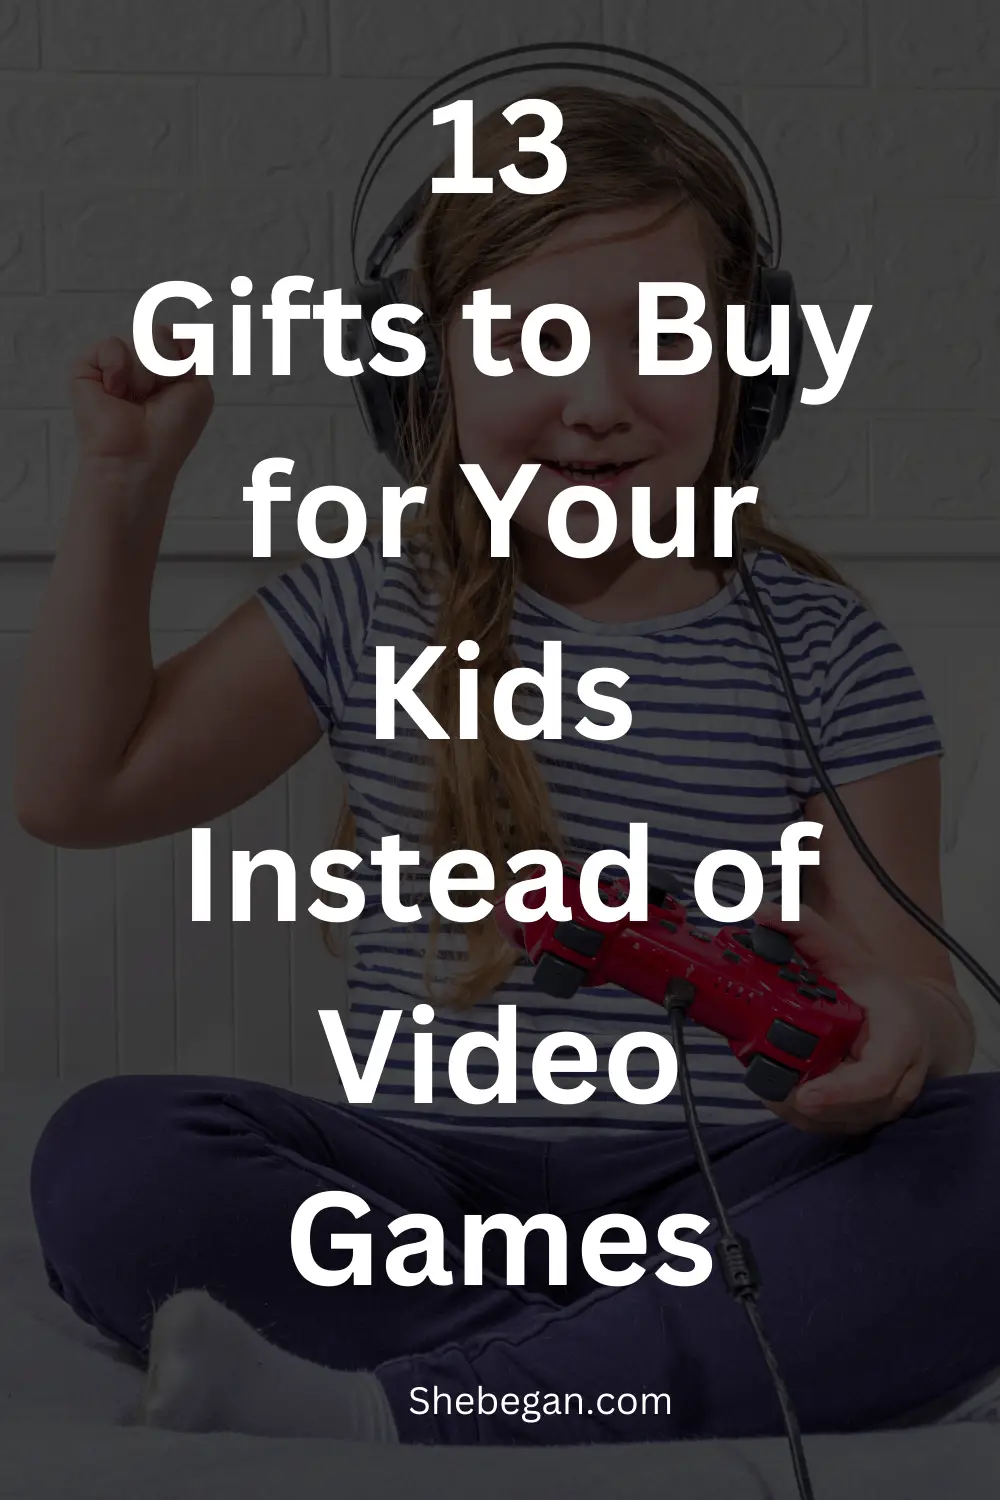 13 Gifts to Buy for Your Kids Instead of Video Games